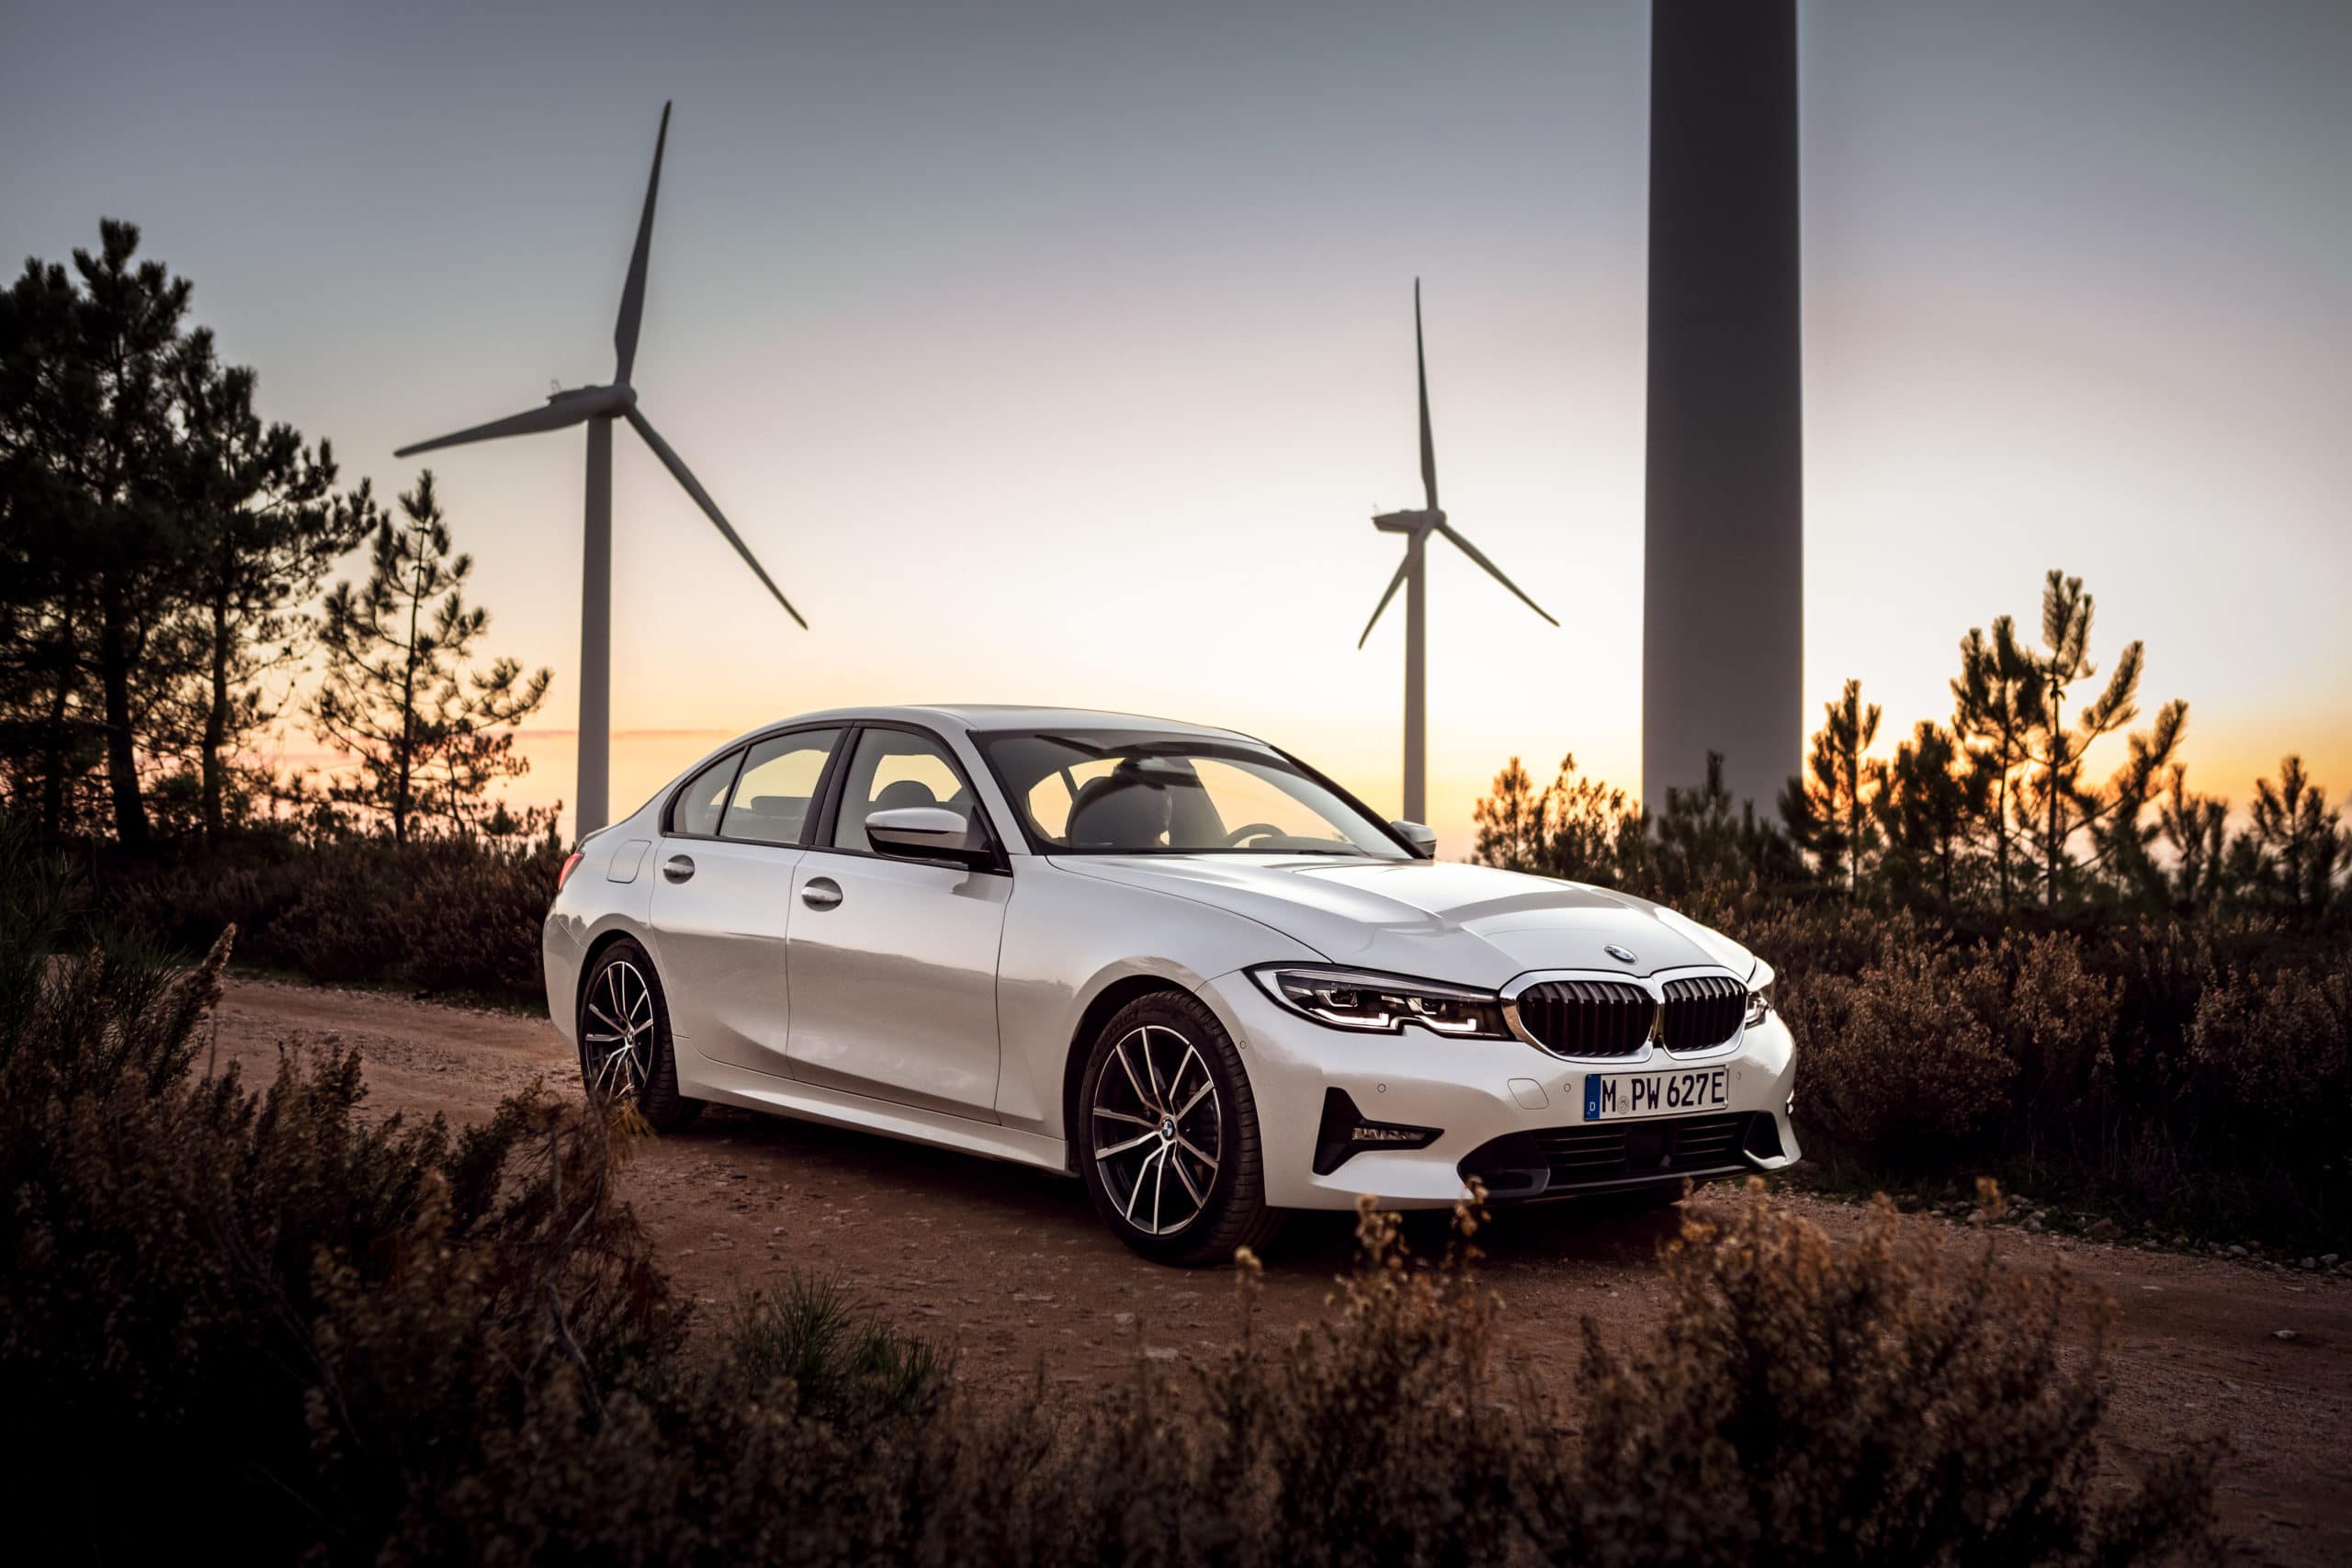 BMW Group and PG&E Plug-In to Leverage Renewable Energy